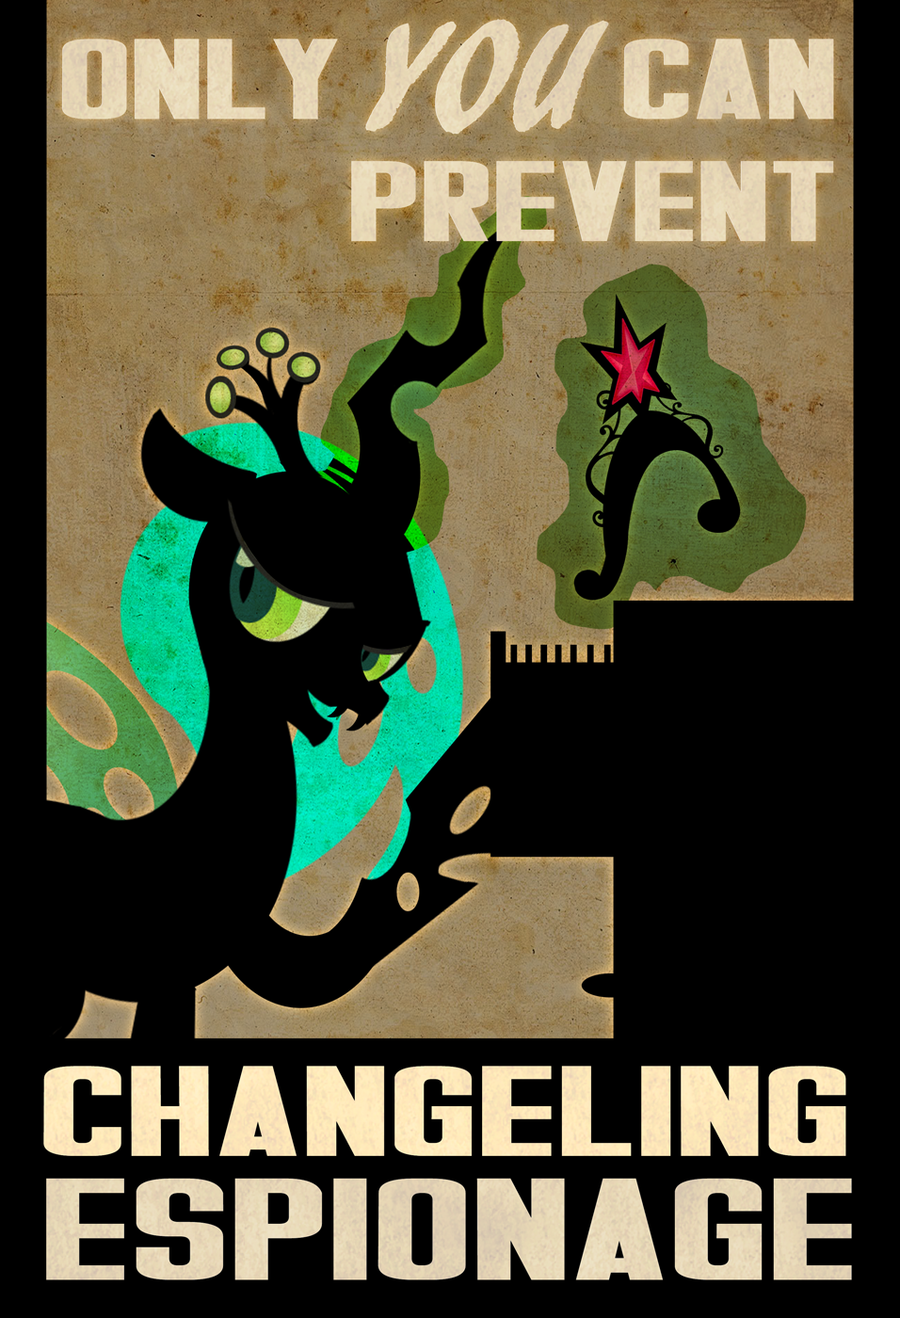 changling_espionage_by_pixelkitties-d4ycsy7.png